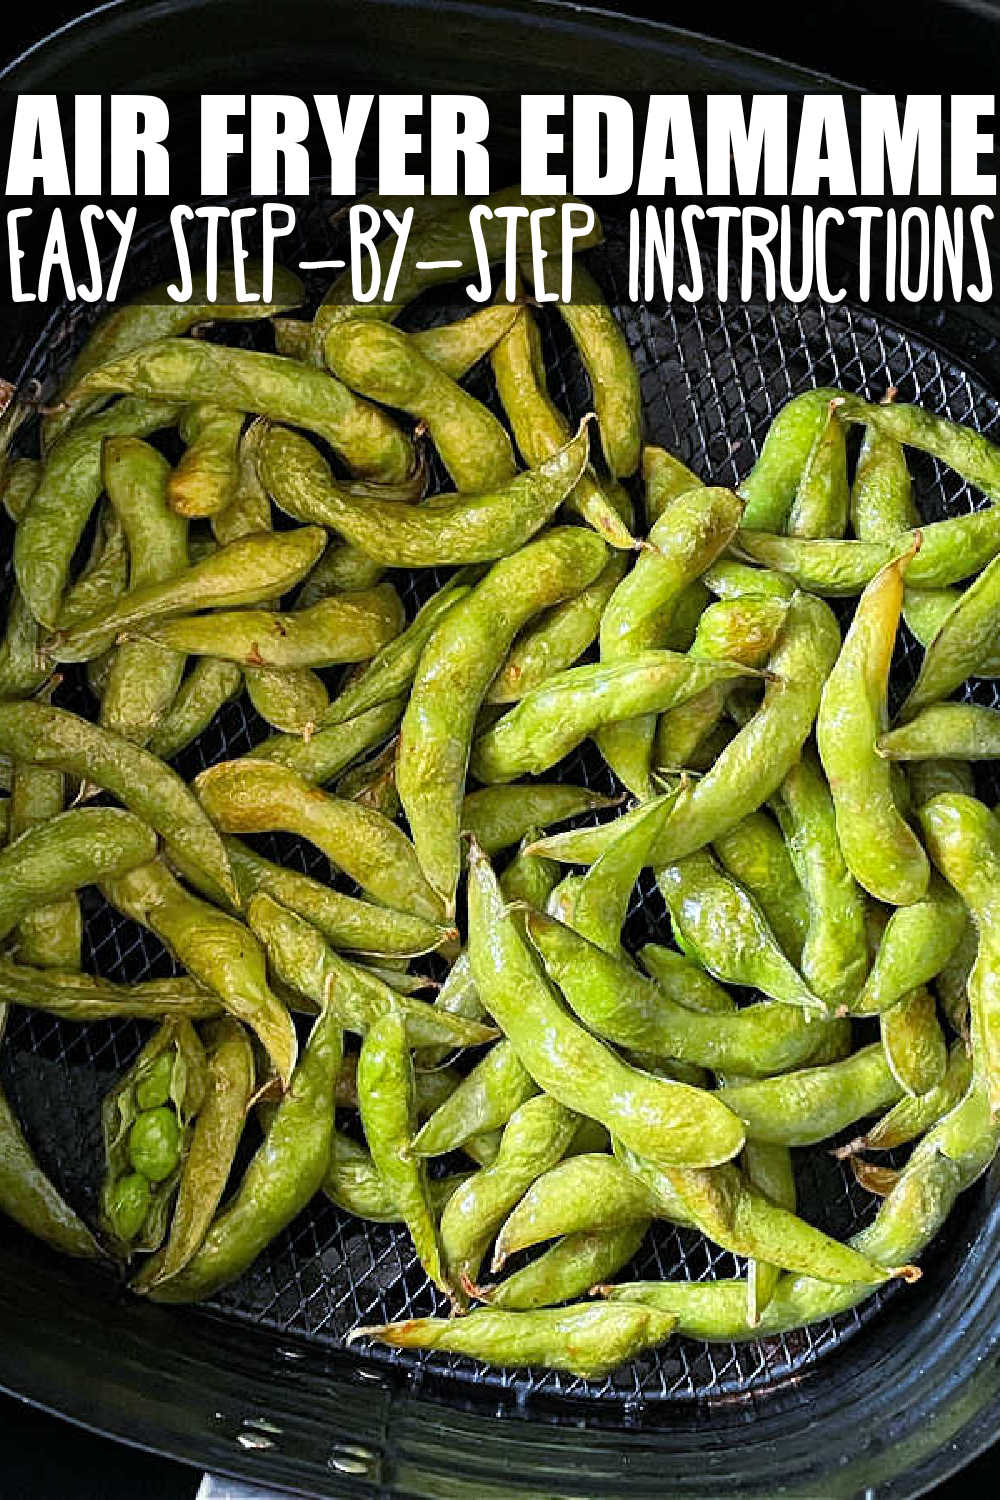 Air Fryer Edamame is a healthy and delicious snack that is ready in just a few minutes and as simple as opening a frozen bag of soy beans. via @foodtasticmom